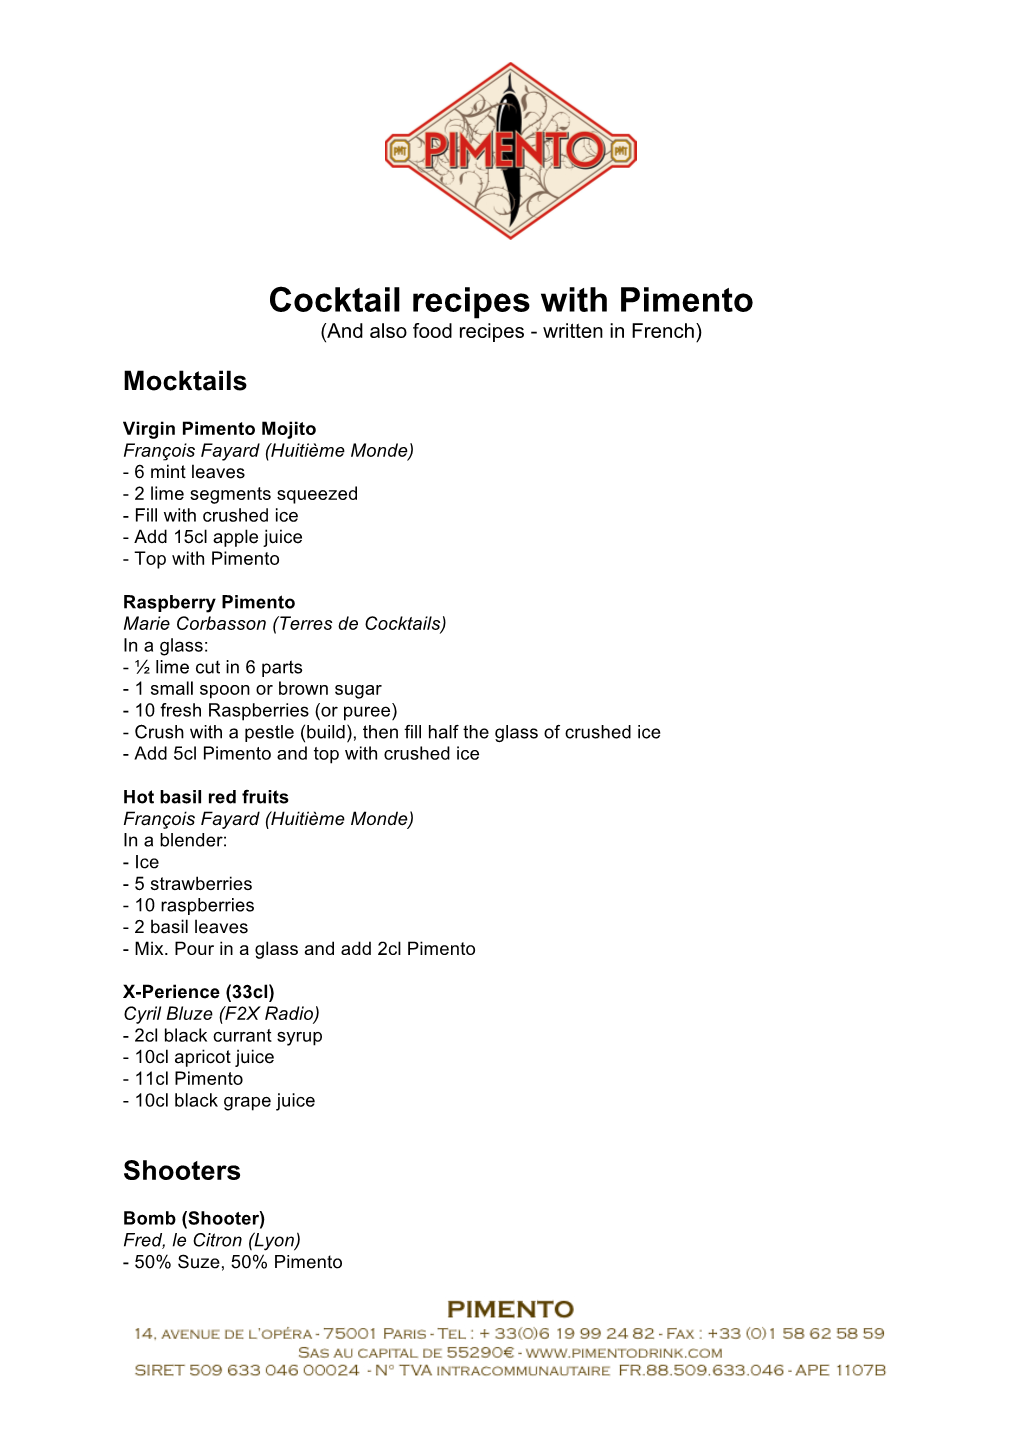 Cocktail Recipes with Pimento (And Also Food Recipes - Written in French)